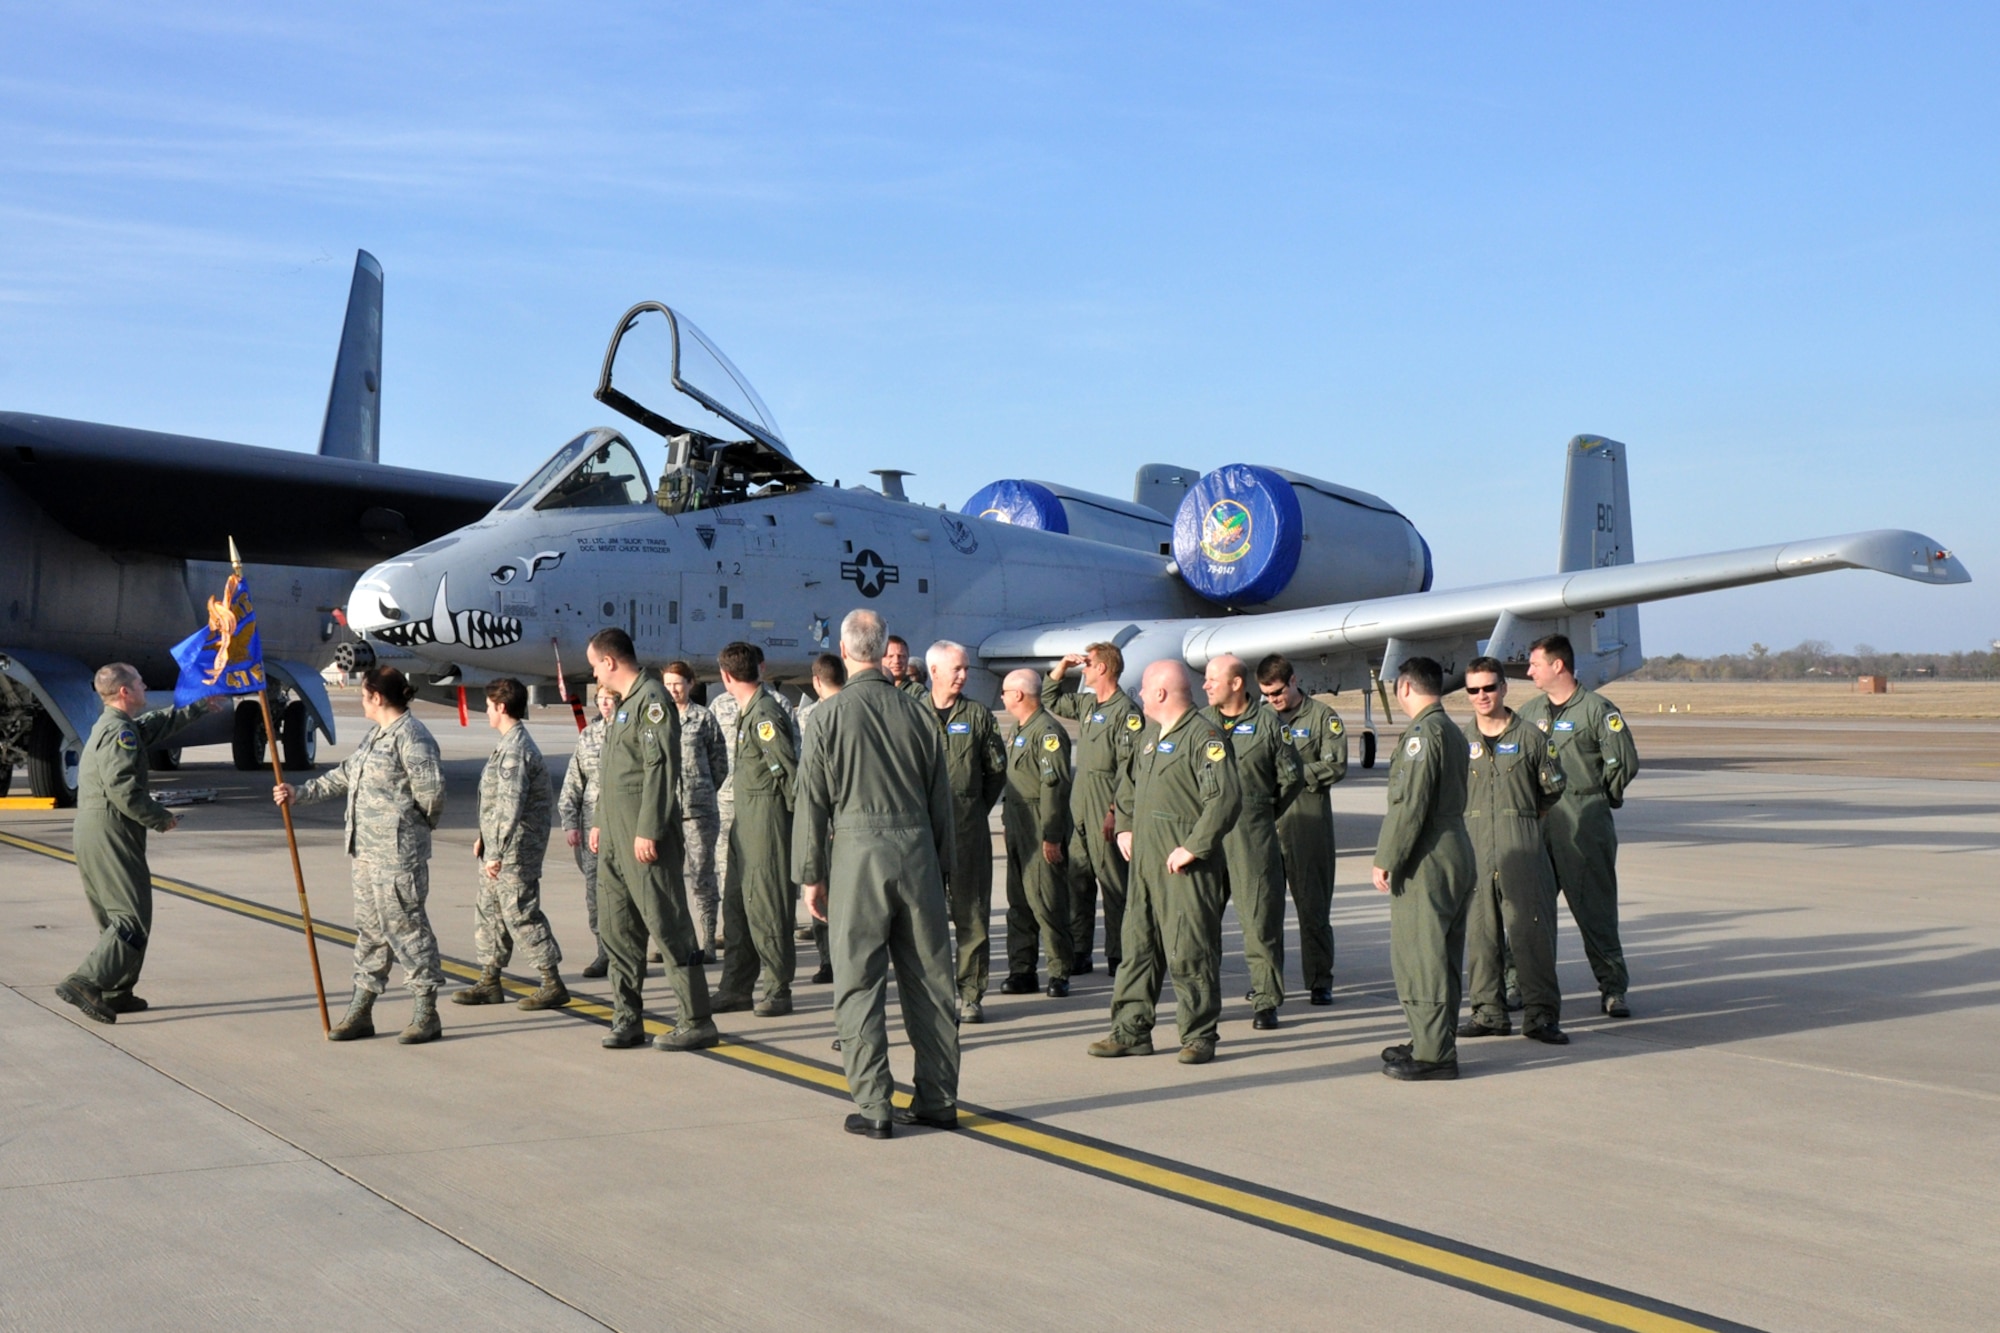 Lt. Col. James Travis, commander, 47th Fighter Squadron, directs personnel to take their places for a group photo during the Unit Training Assembly weekend at Barksdale Air Force Base, La., Dec. 4, 2010. Group, squadron and flight photos were taken for historical purposes during the weekend, since the 917th Wing will soon be deactivated and these will be the last photos taken as the 917th Wing. The wing will be deactivated in ceremonies Jan. 8, 2010 and the 307th Bomb Wing will be reactivated. (U.S. Air Force photo /Tech. Sgt. Jeff Walston)